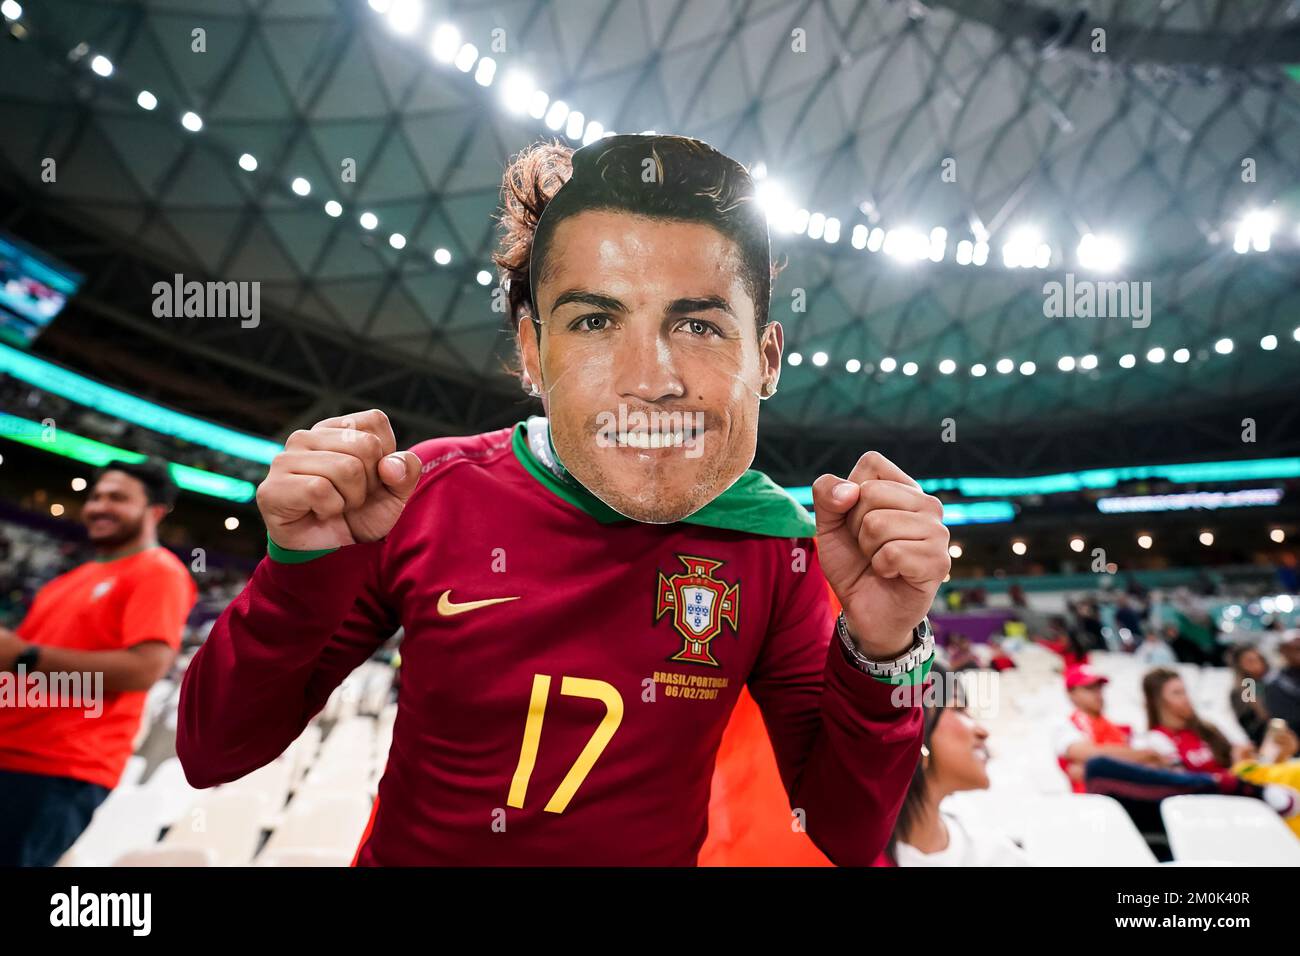 læbe kapillærer Historiker DOHA, QATAR - DECEMBER 6: Supporter of Portugal with a Cristiano Ronaldo  mask poses for a photo before the FIFA World Cup Qatar 2022 Round of 16  match between Portugal and Switzerland